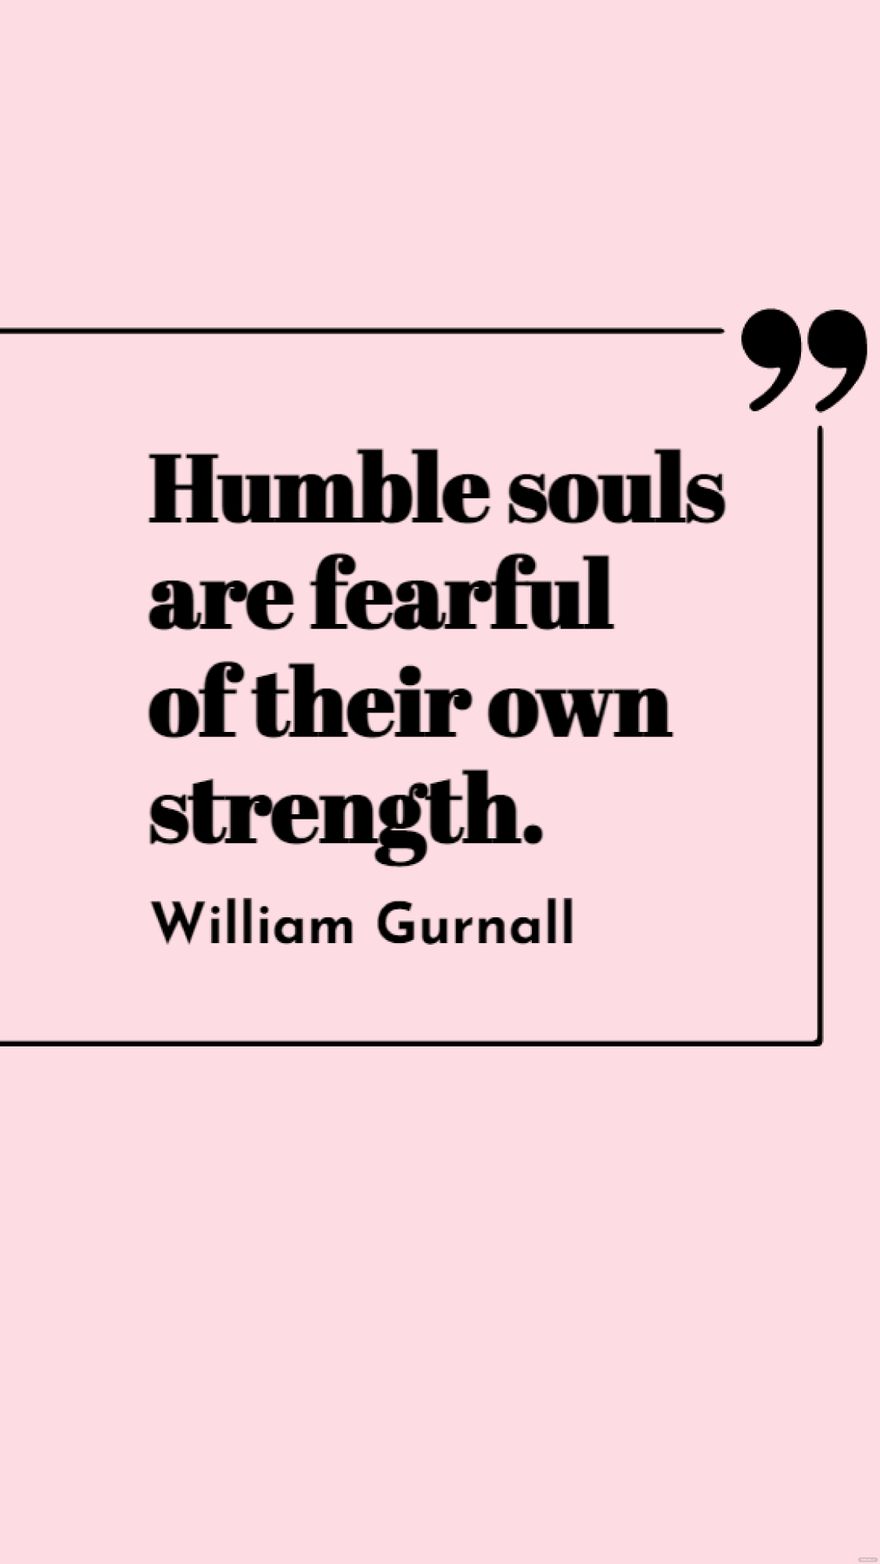 William Gurnall - Humble souls are fearful of their own strength.